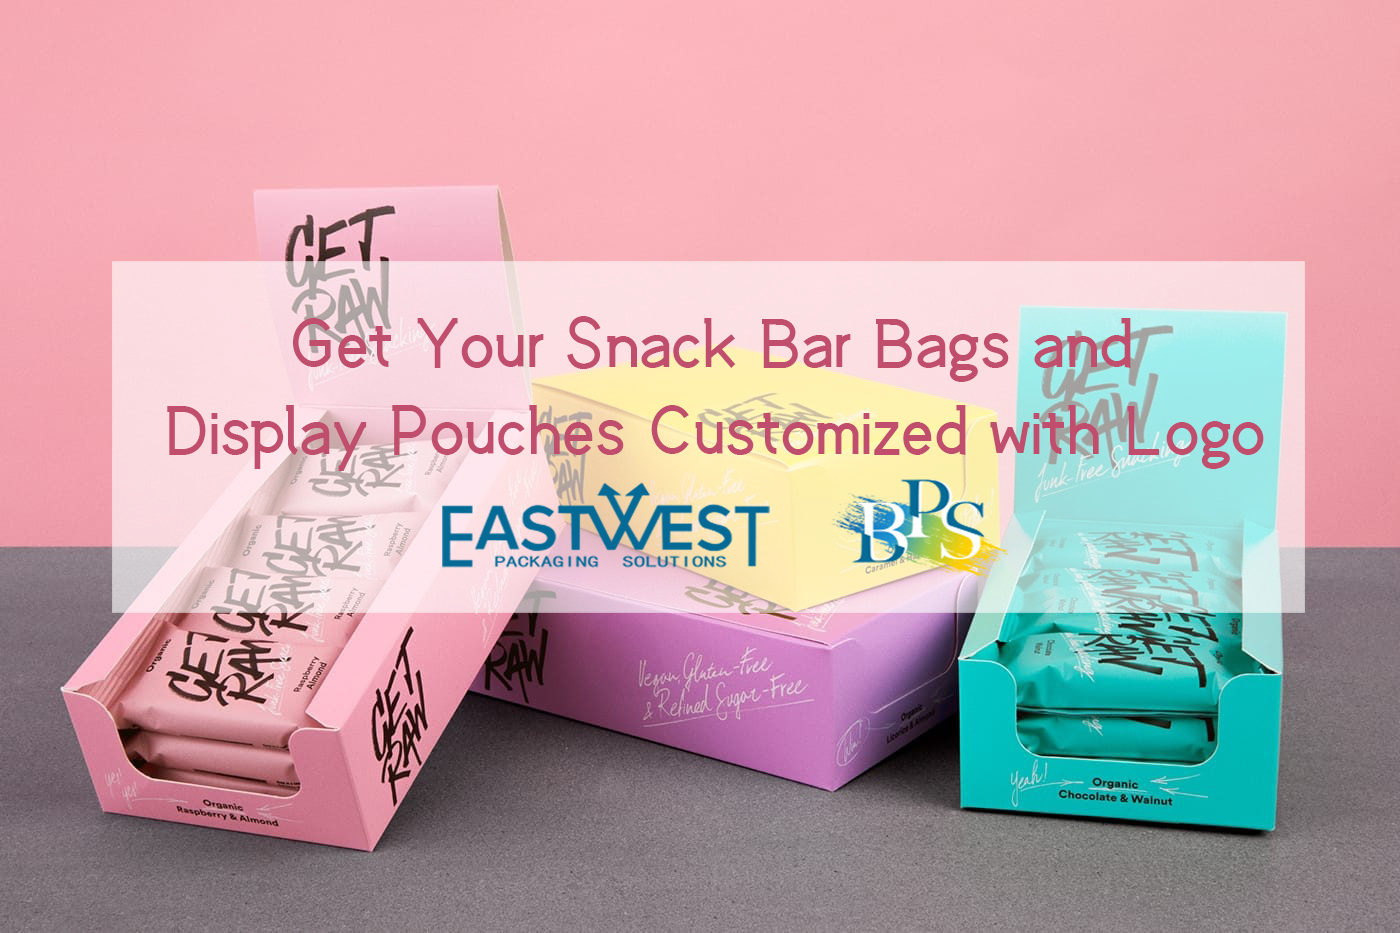 Get Your Snack Bar Bags and Display Pouches Customized with Logo